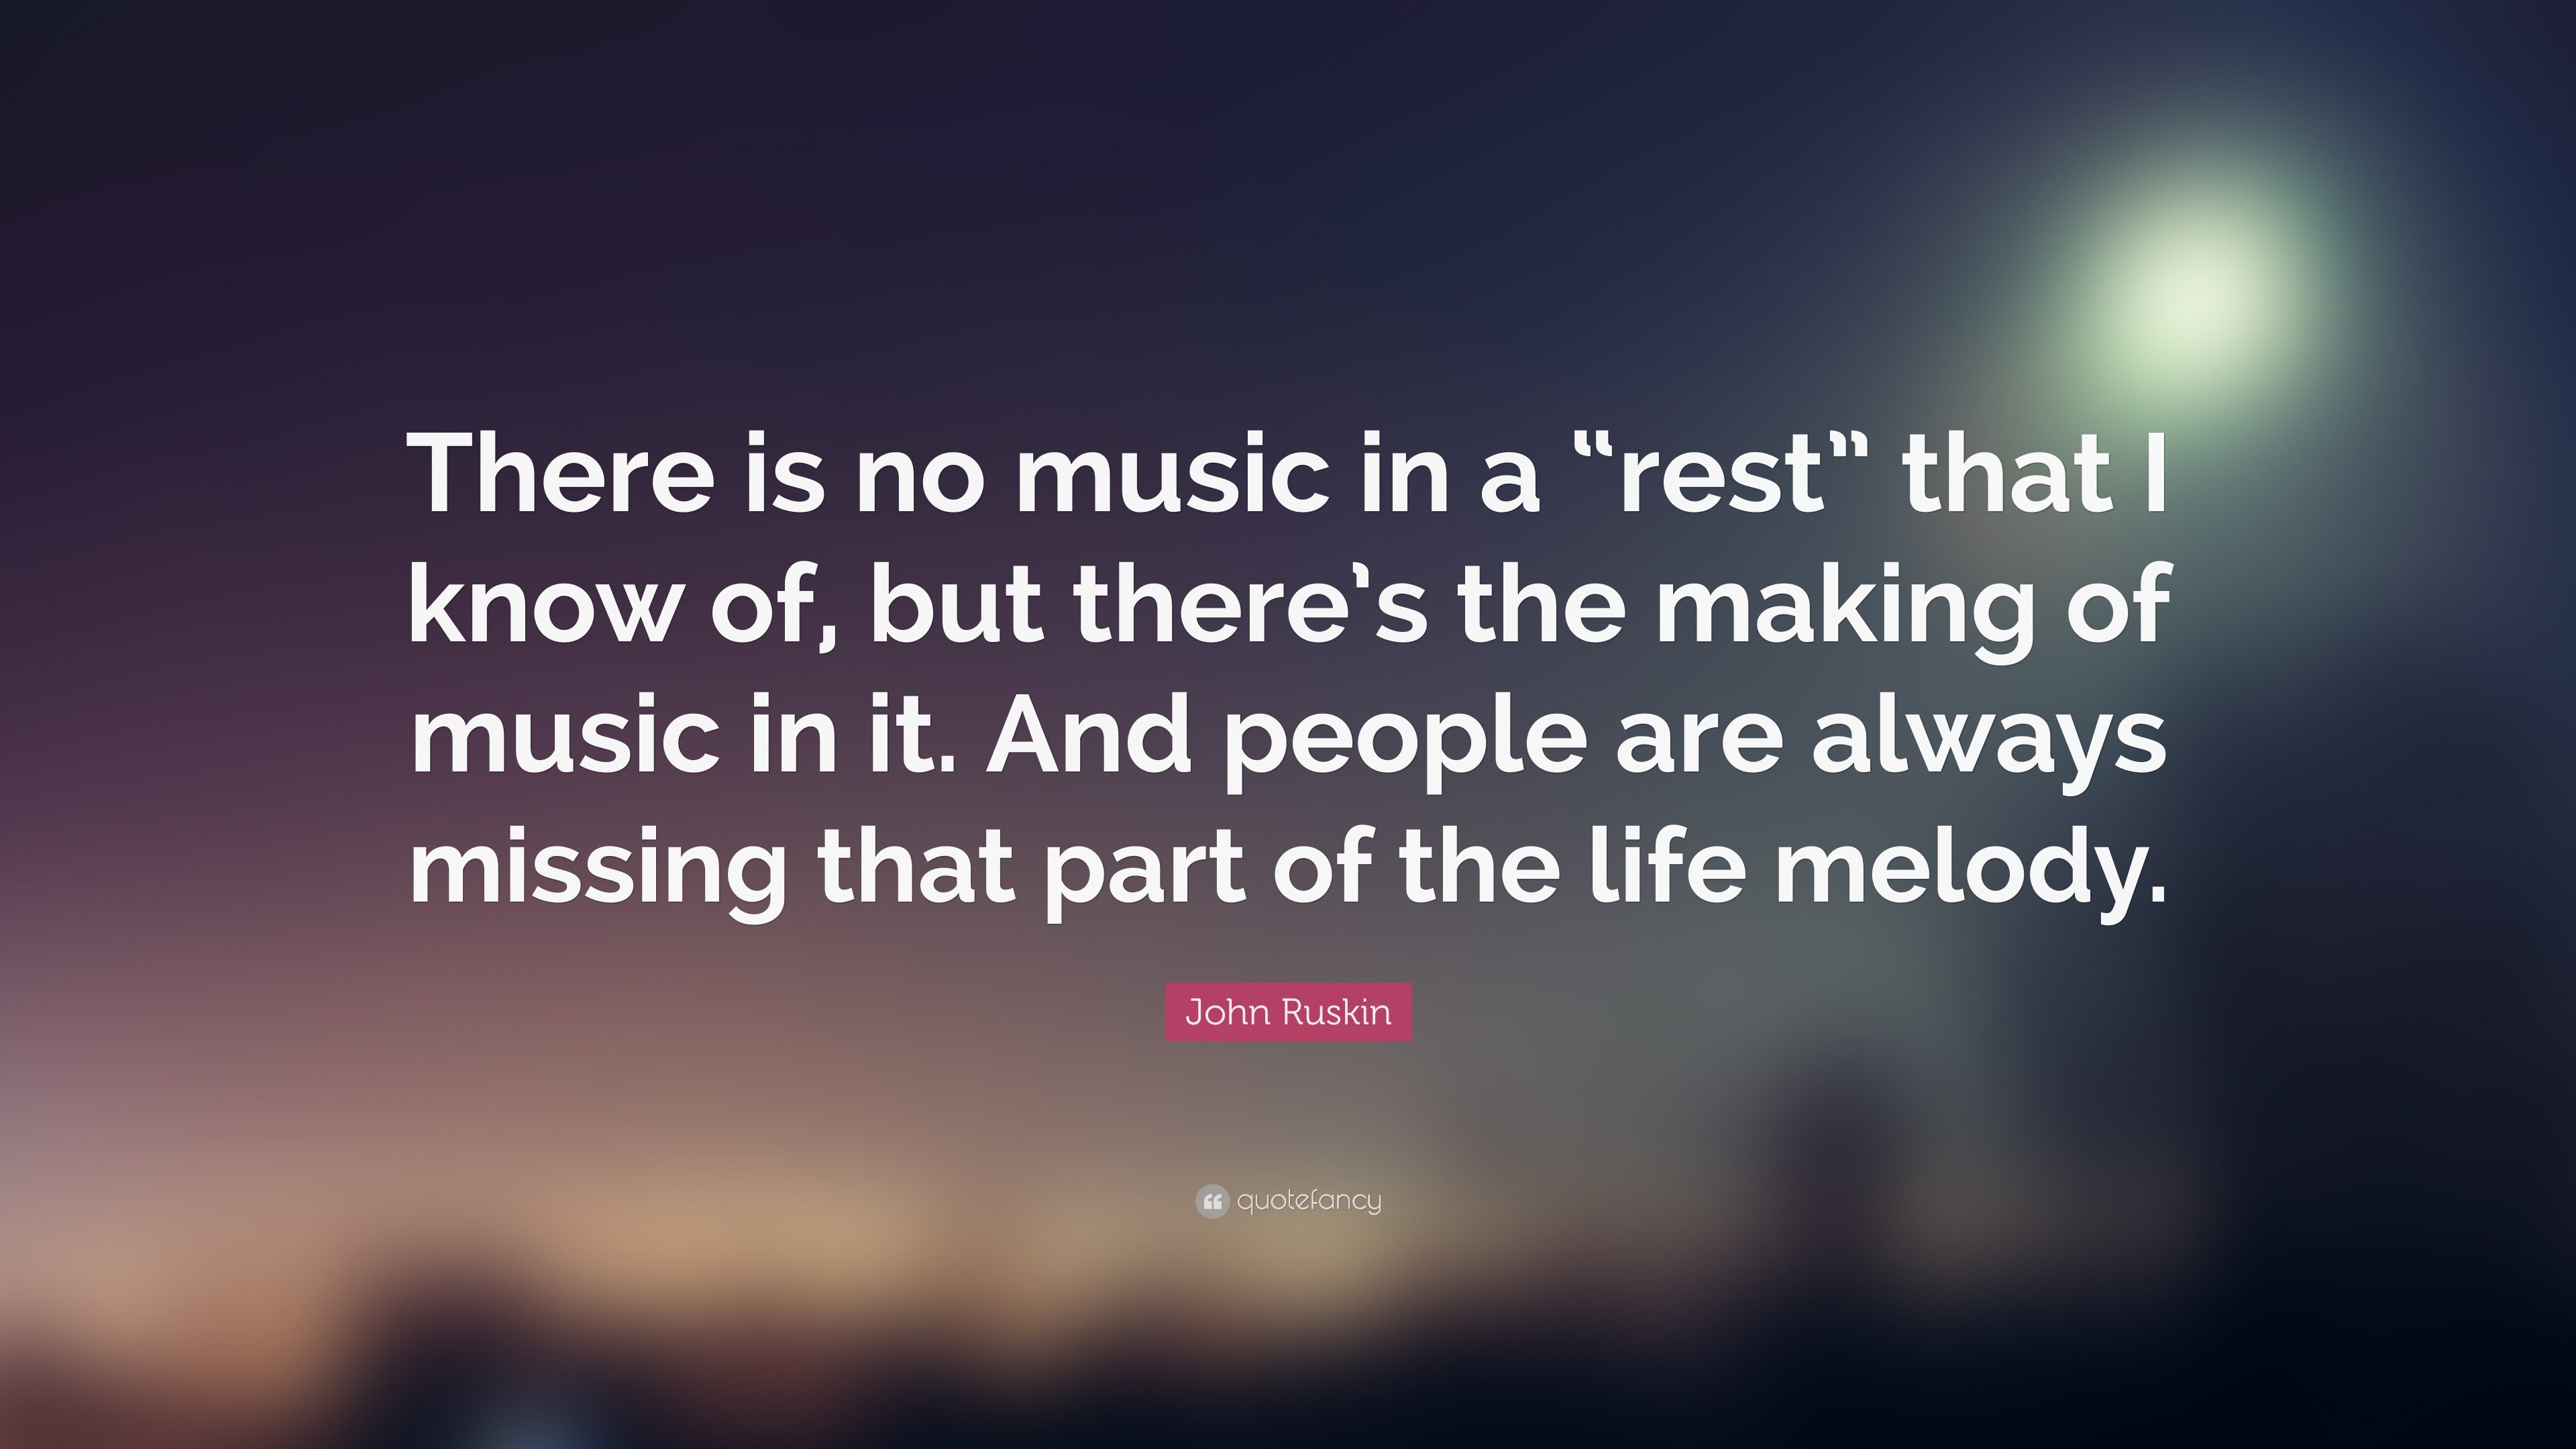 John Ruskin Quote: “There is no music in a “rest” that I know of, but ...